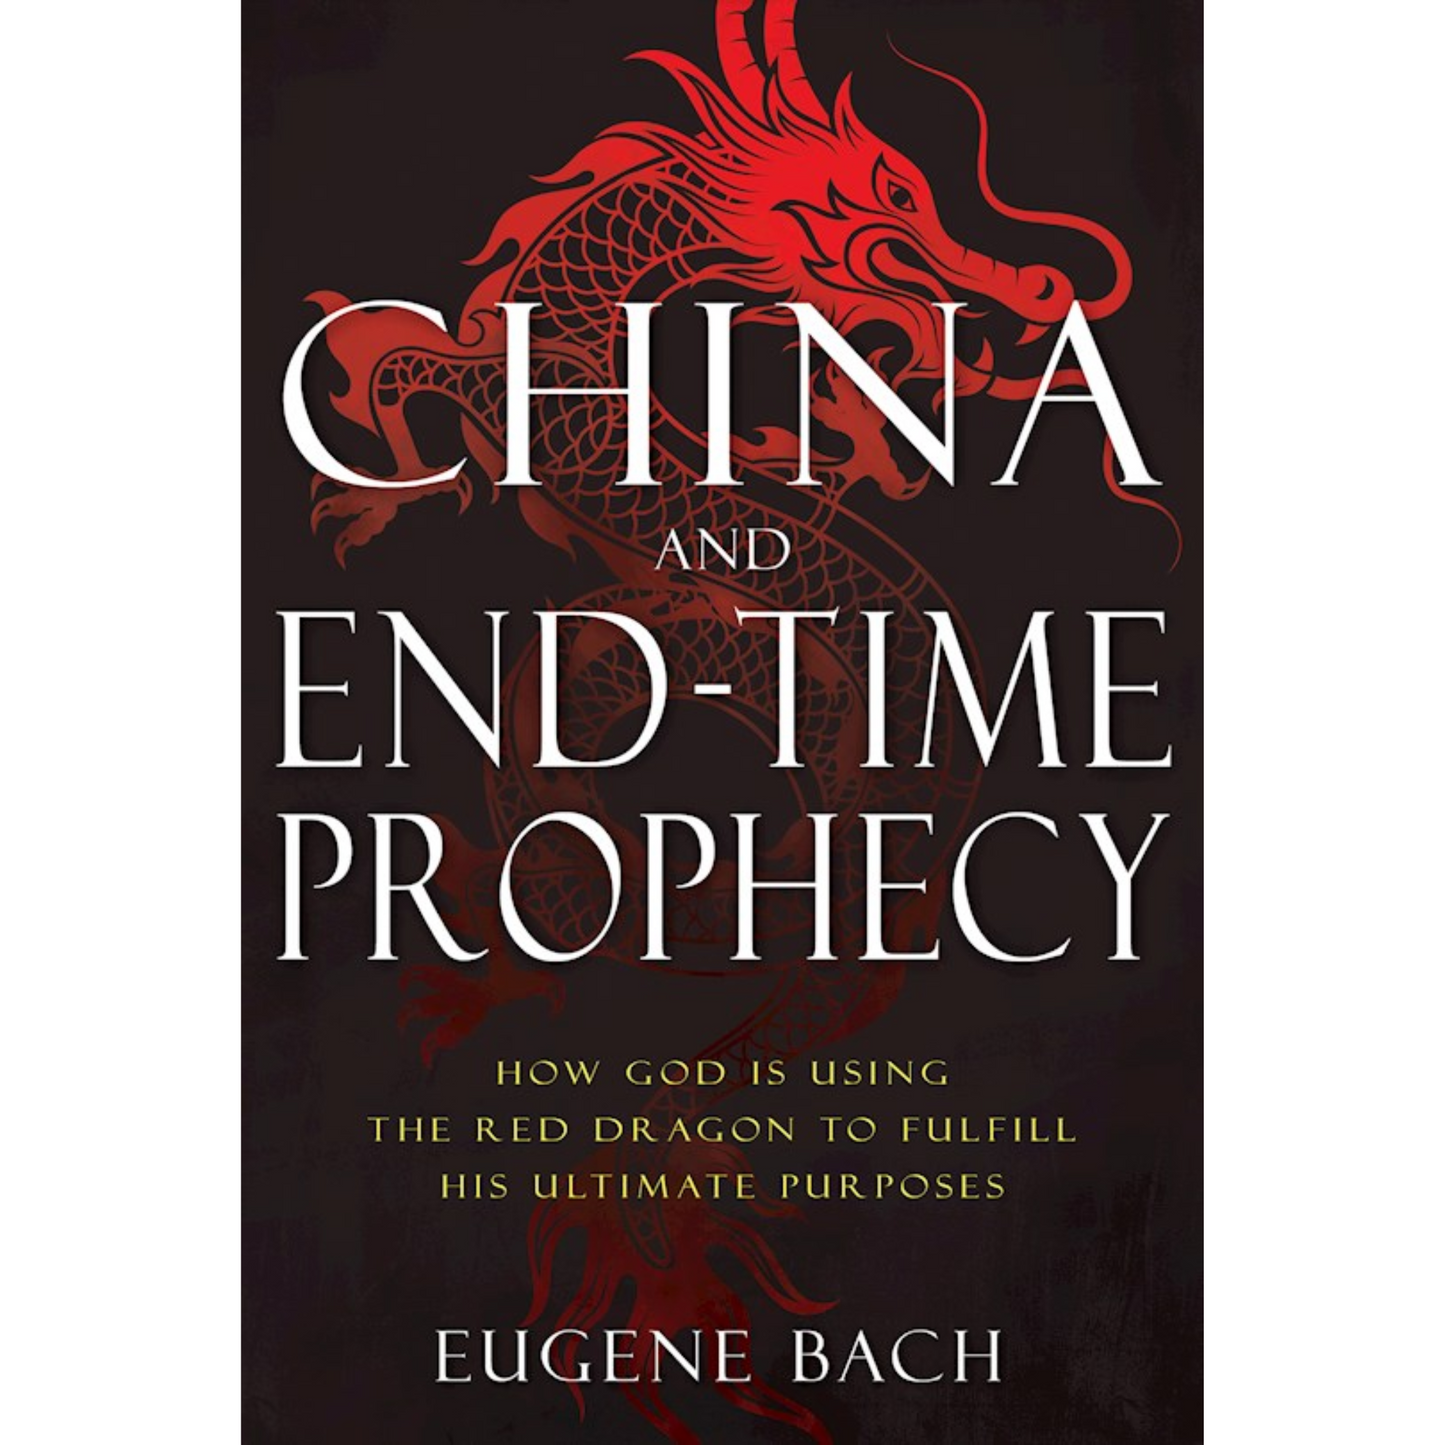 End-time Prophecy on China